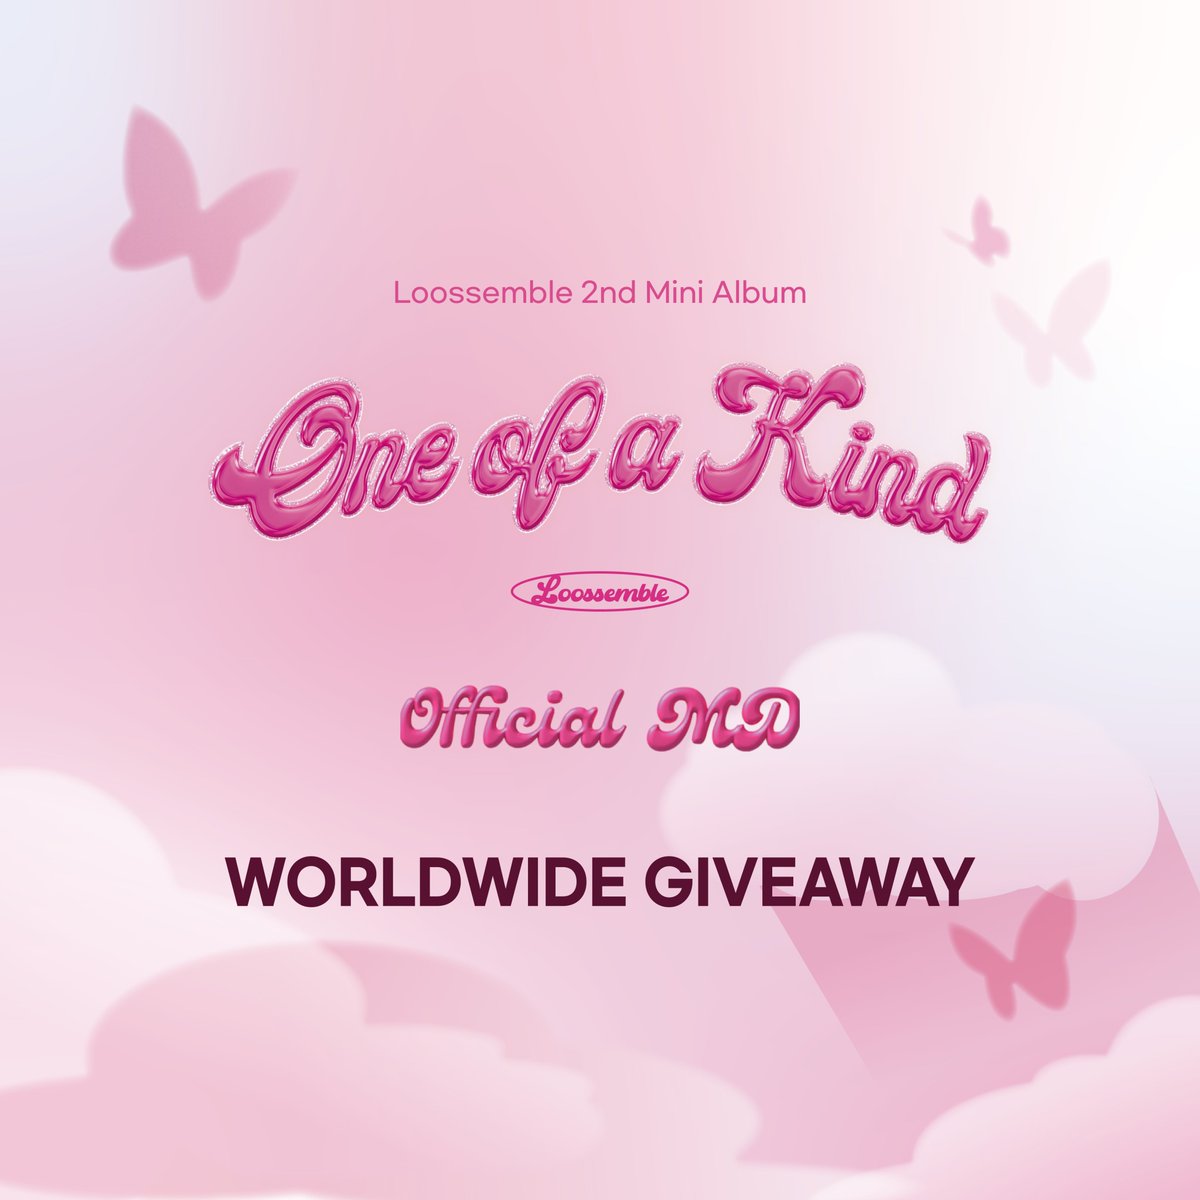 LOOSSEMBLE - ONE OF A KIND 2ND MINI ALBUM OFFICIAL MD WORLDWIDE GIVEAWAY🎁 - Like this post & Follow @cokodive - Comment the merch you want - RT and Tag C.LOO You can get LOOSSEMBLE - ONE OF A KIND 2ND MINI ALBUM OFFICIAL MD at COKODIVE!